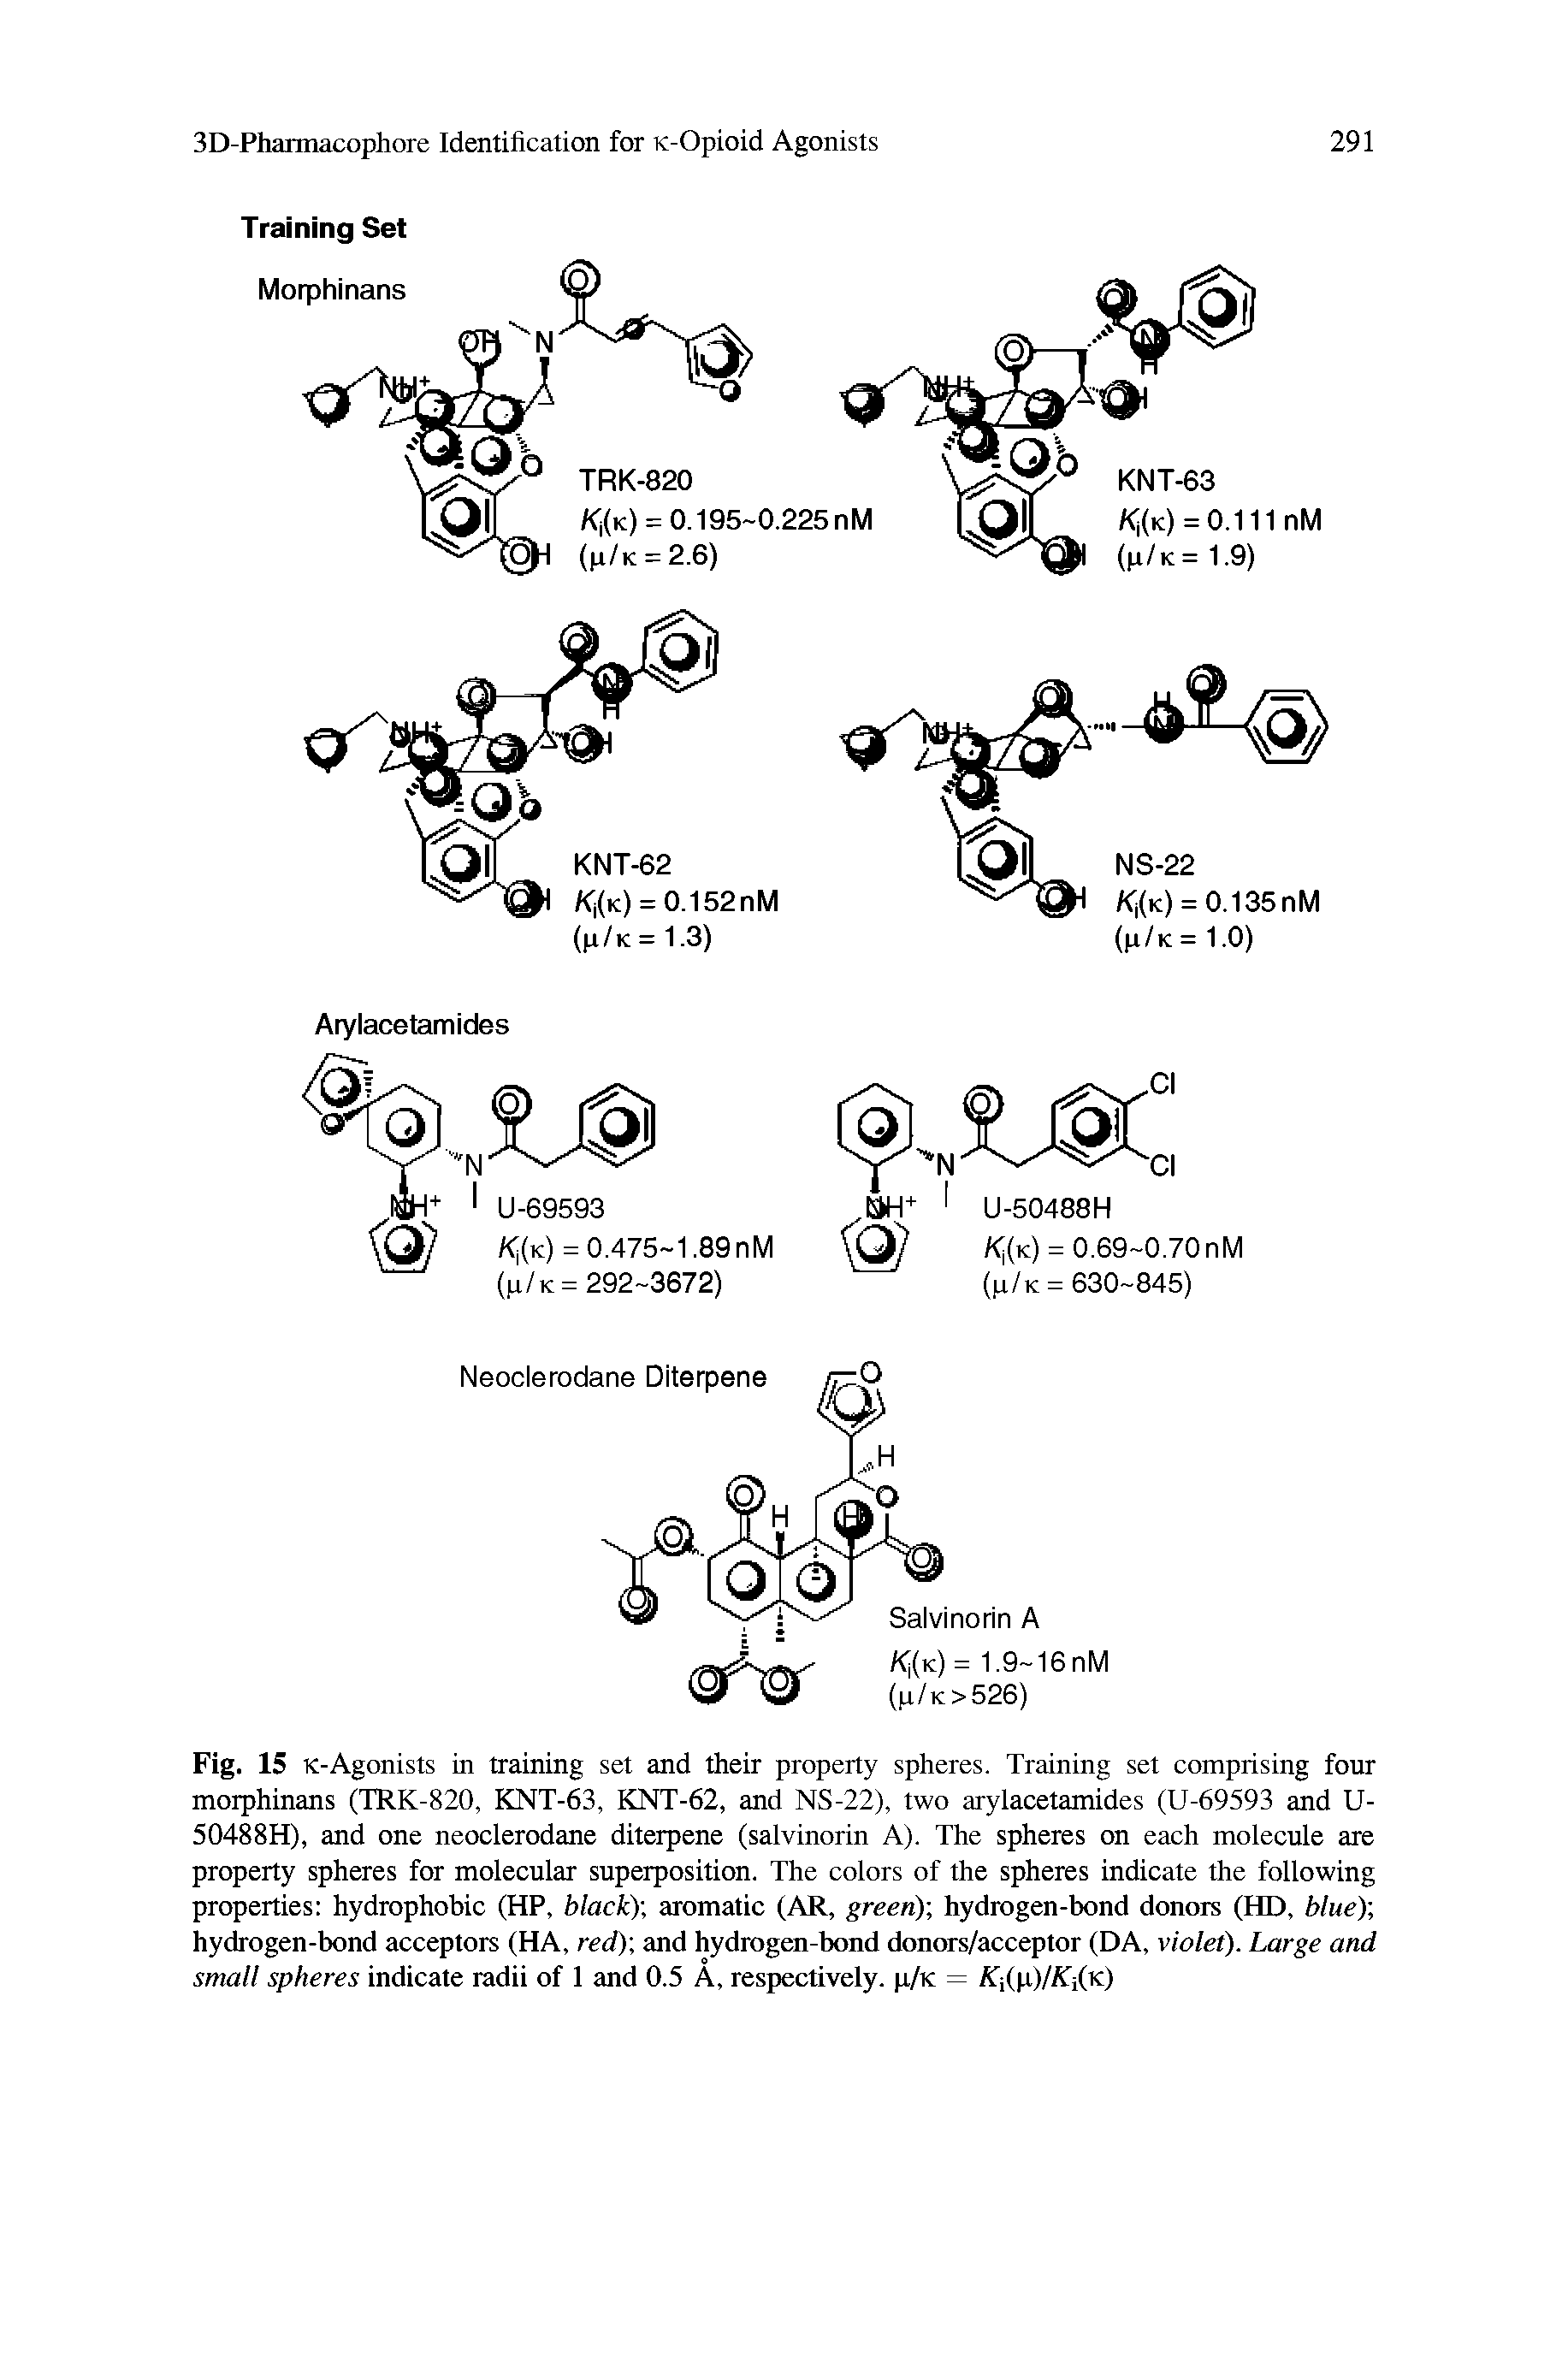 Fig. 15 K-Agonists in training set and their property spheres. Training set comprising four morphinans (TRK-820, KNT-63, KNT-62, and NS-22), two arylacetamides (U-69593 and U-50488H), and one neoclerodane diterpene (salvinorin A). The spheres on each molecule are property spheres for molecular superposition. The colors of the spheres indicate the following properties hydrophobic (HP, black)-, aromatic (AR, green)-, hydrogen-bond donors (HD, blue)-, hydrogen-bond acceptors (HA, red)-, and hydrogen-bond donors/acceptor (DA, violet). Large and small spheres indicate radii of 1 and 0.5 A, respectively. p/K = S, (p)/S i(K)...